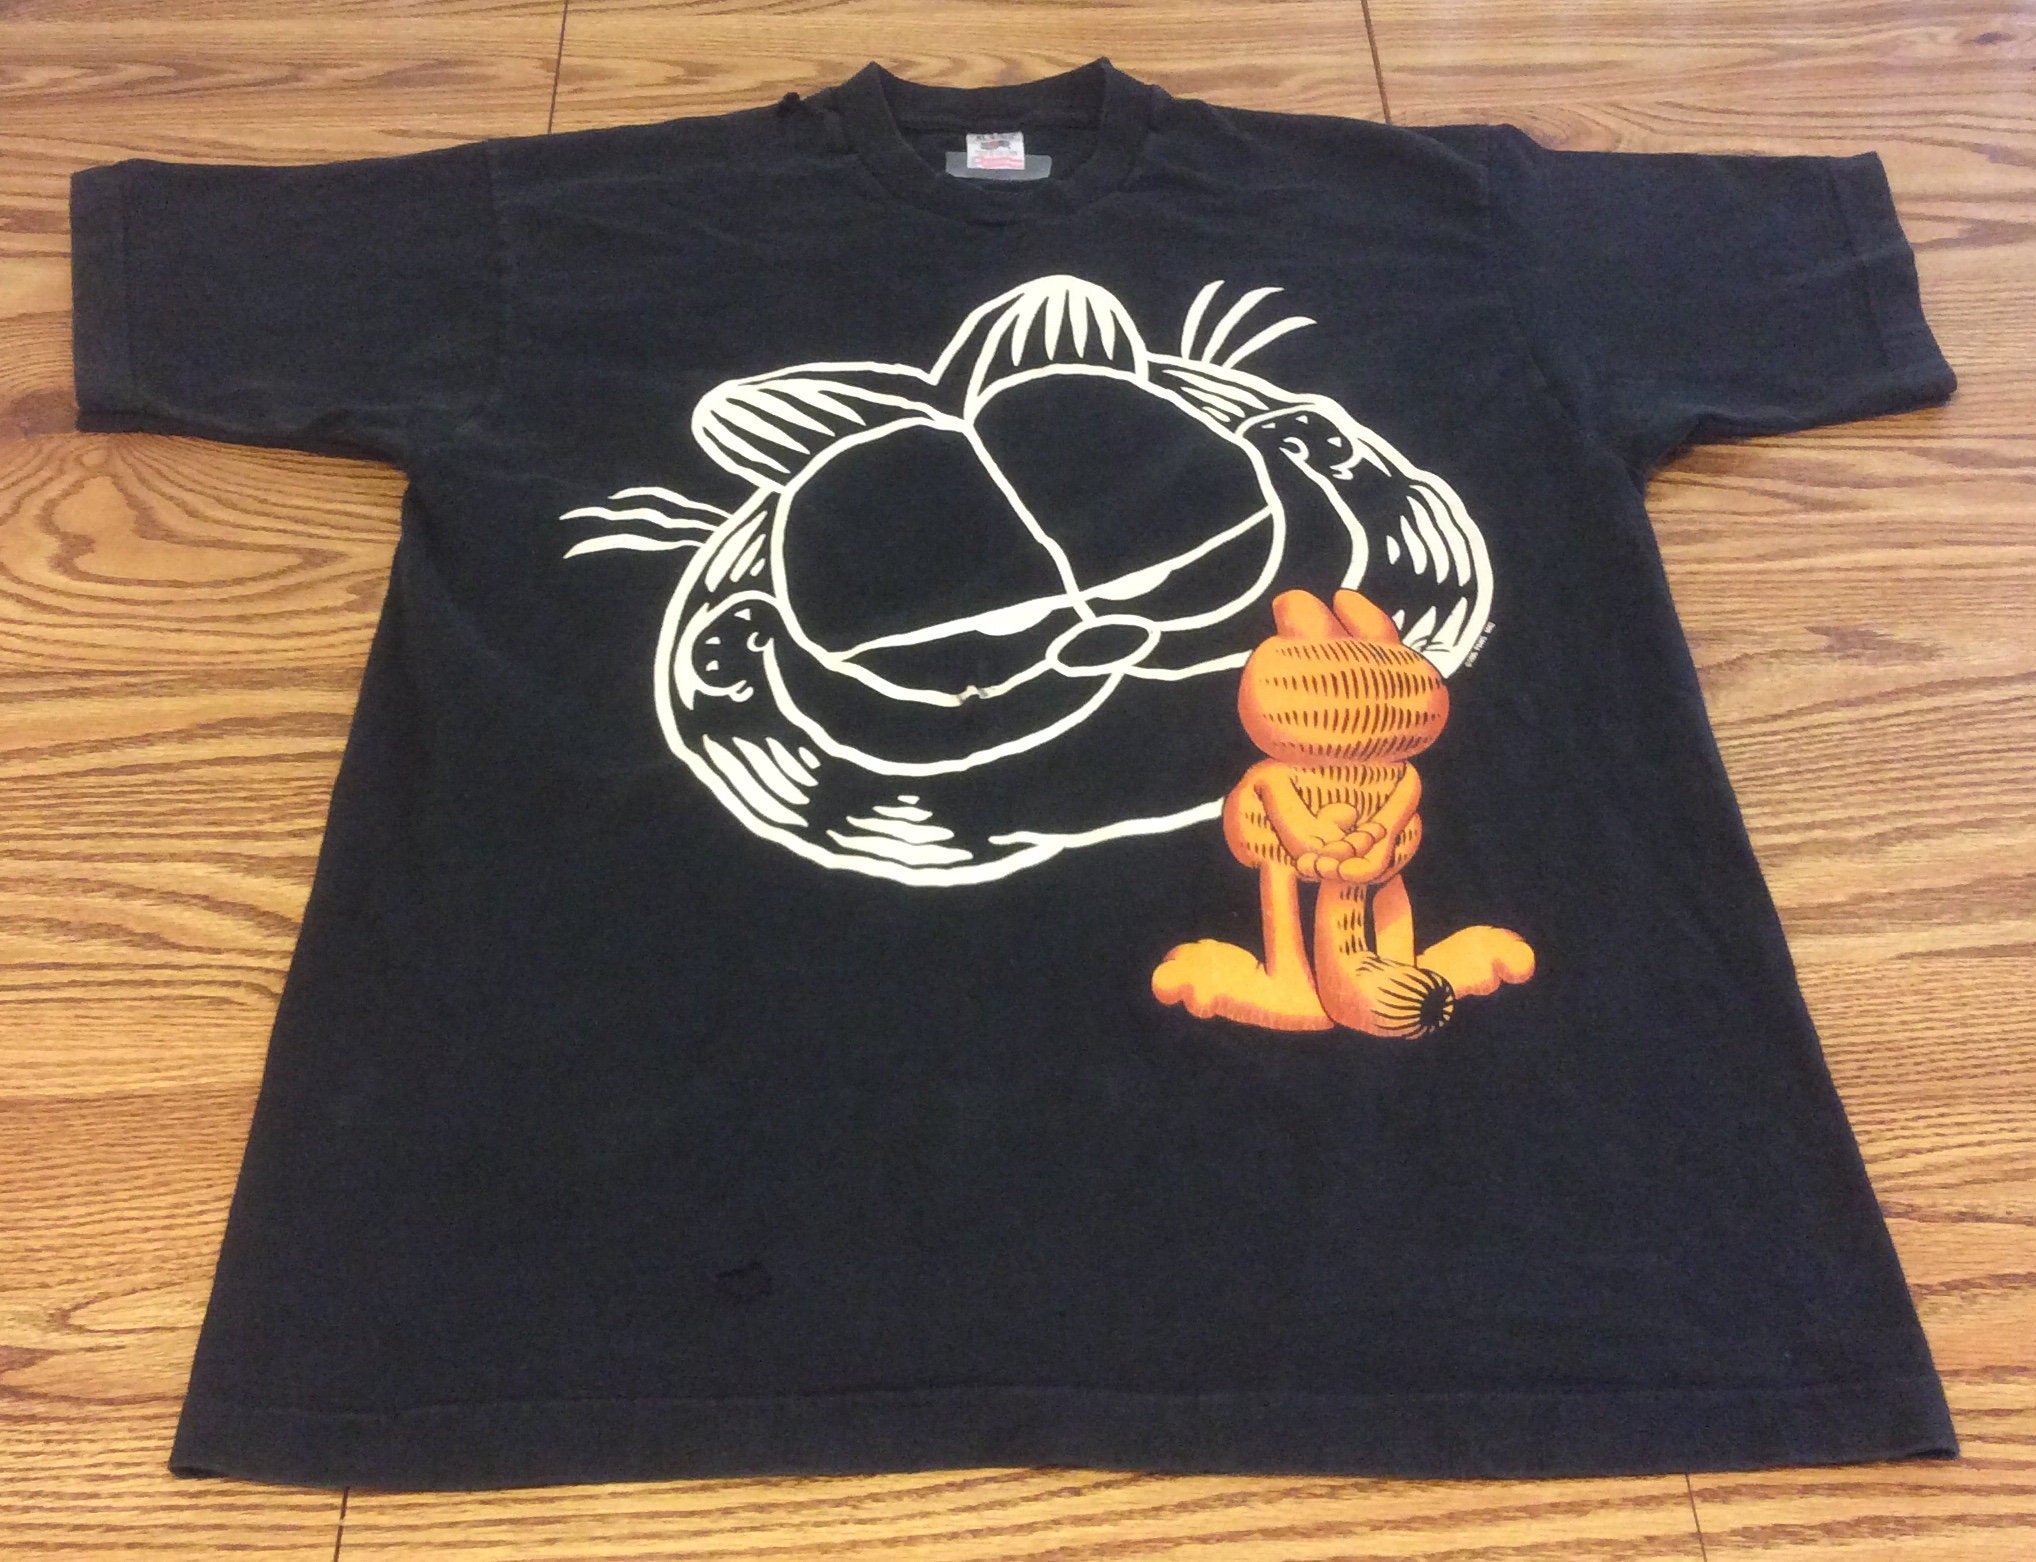 Vintage 1995 Distressed Garfield Graphic T Shirt Black Single Stitch Large  Print Paws Fruit of the Loom Size XL - Etsy